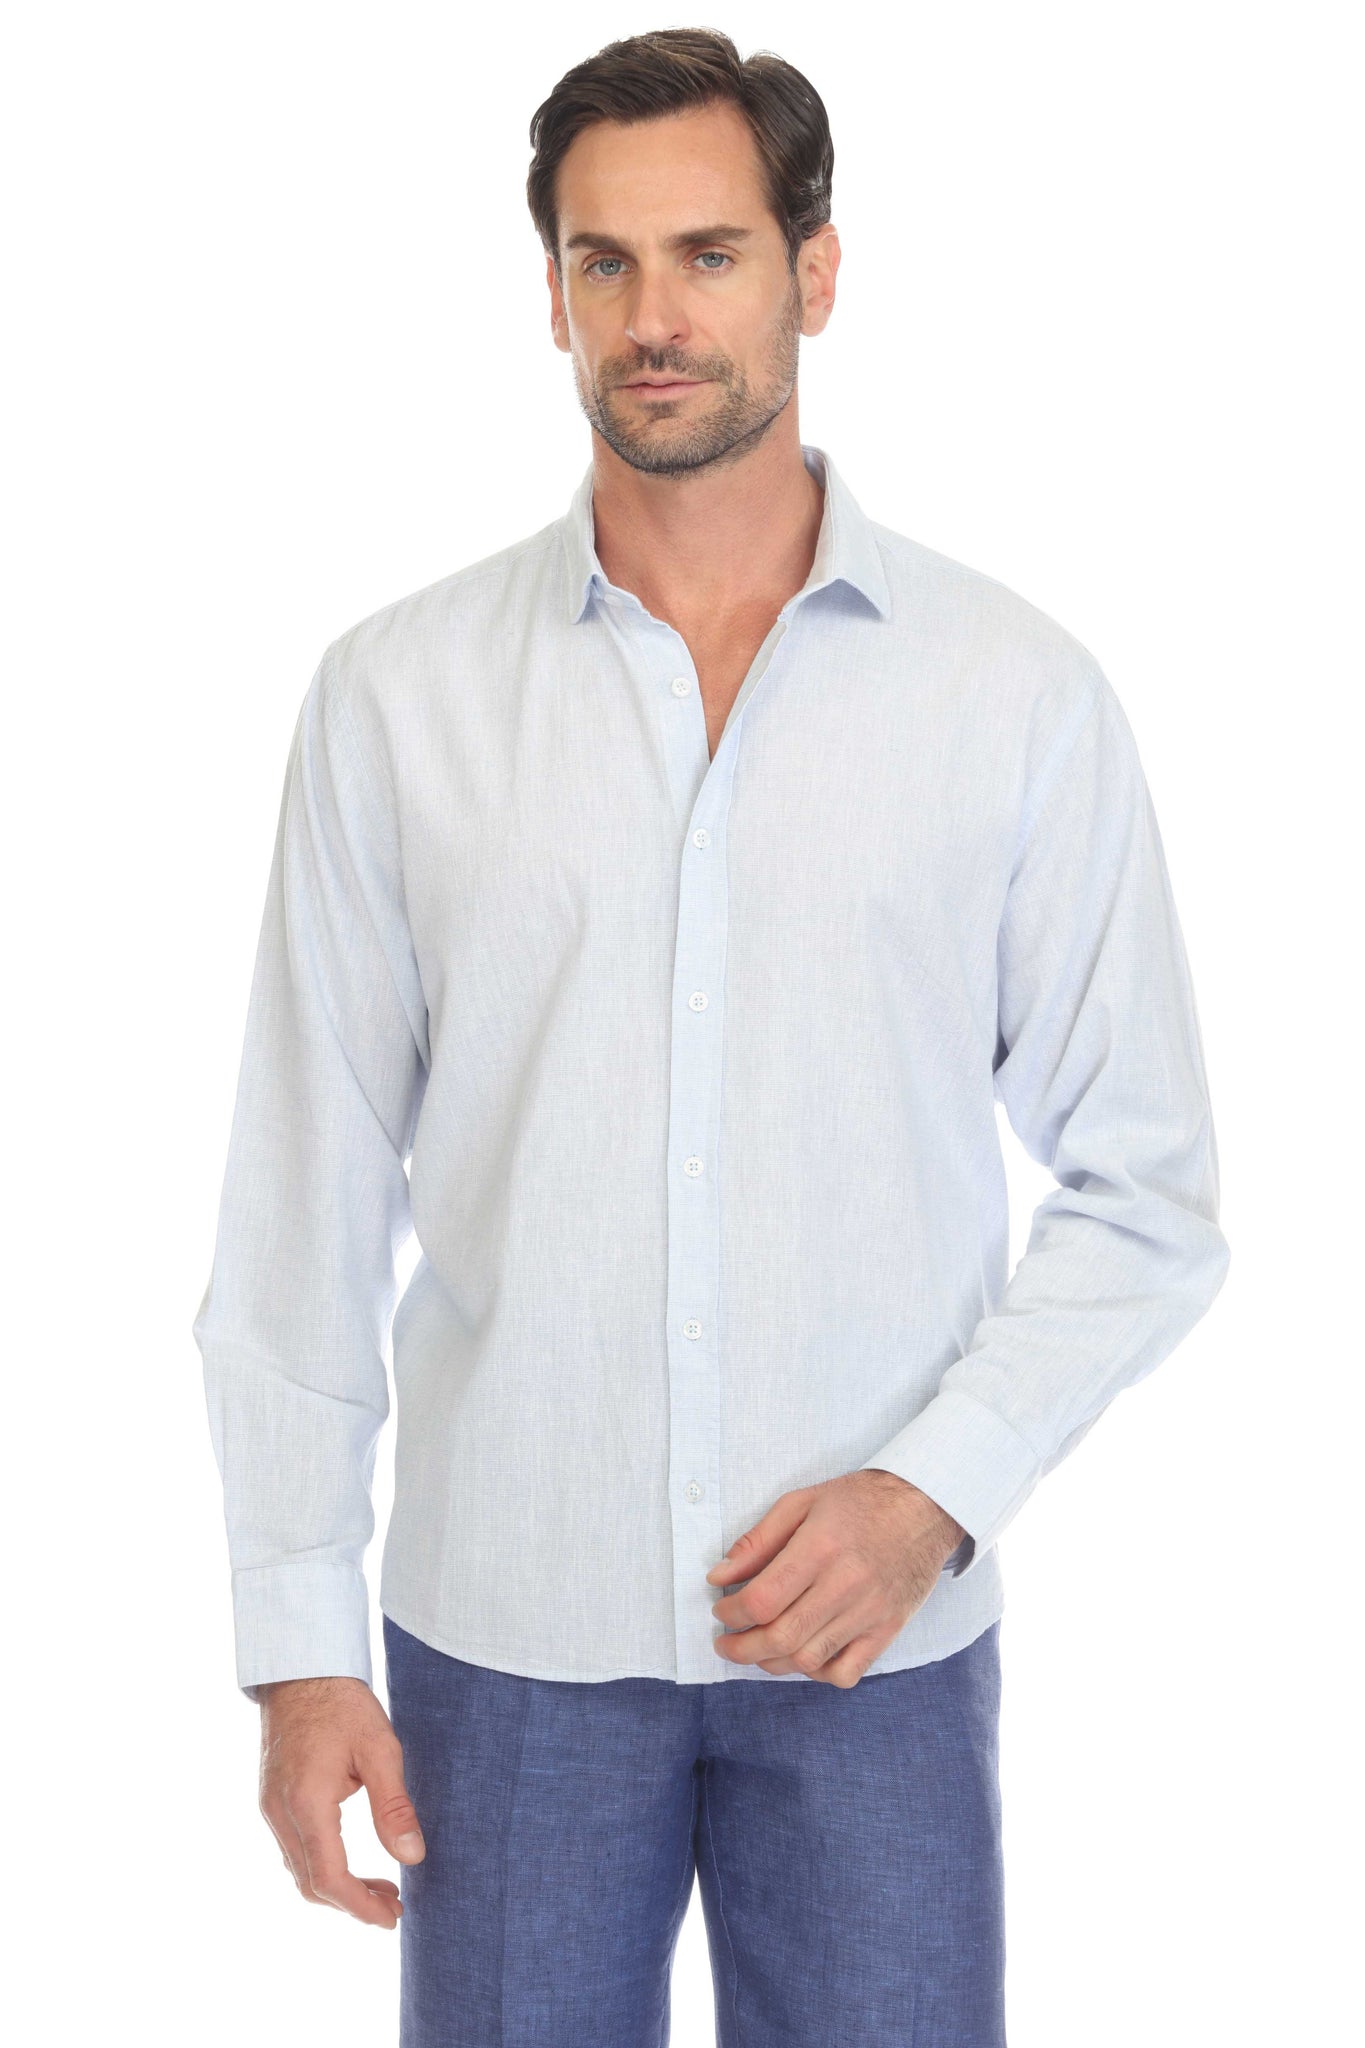 Mojito Collection Slim Fit Casual Linen Blend Shirt Long Sleeve Button Down